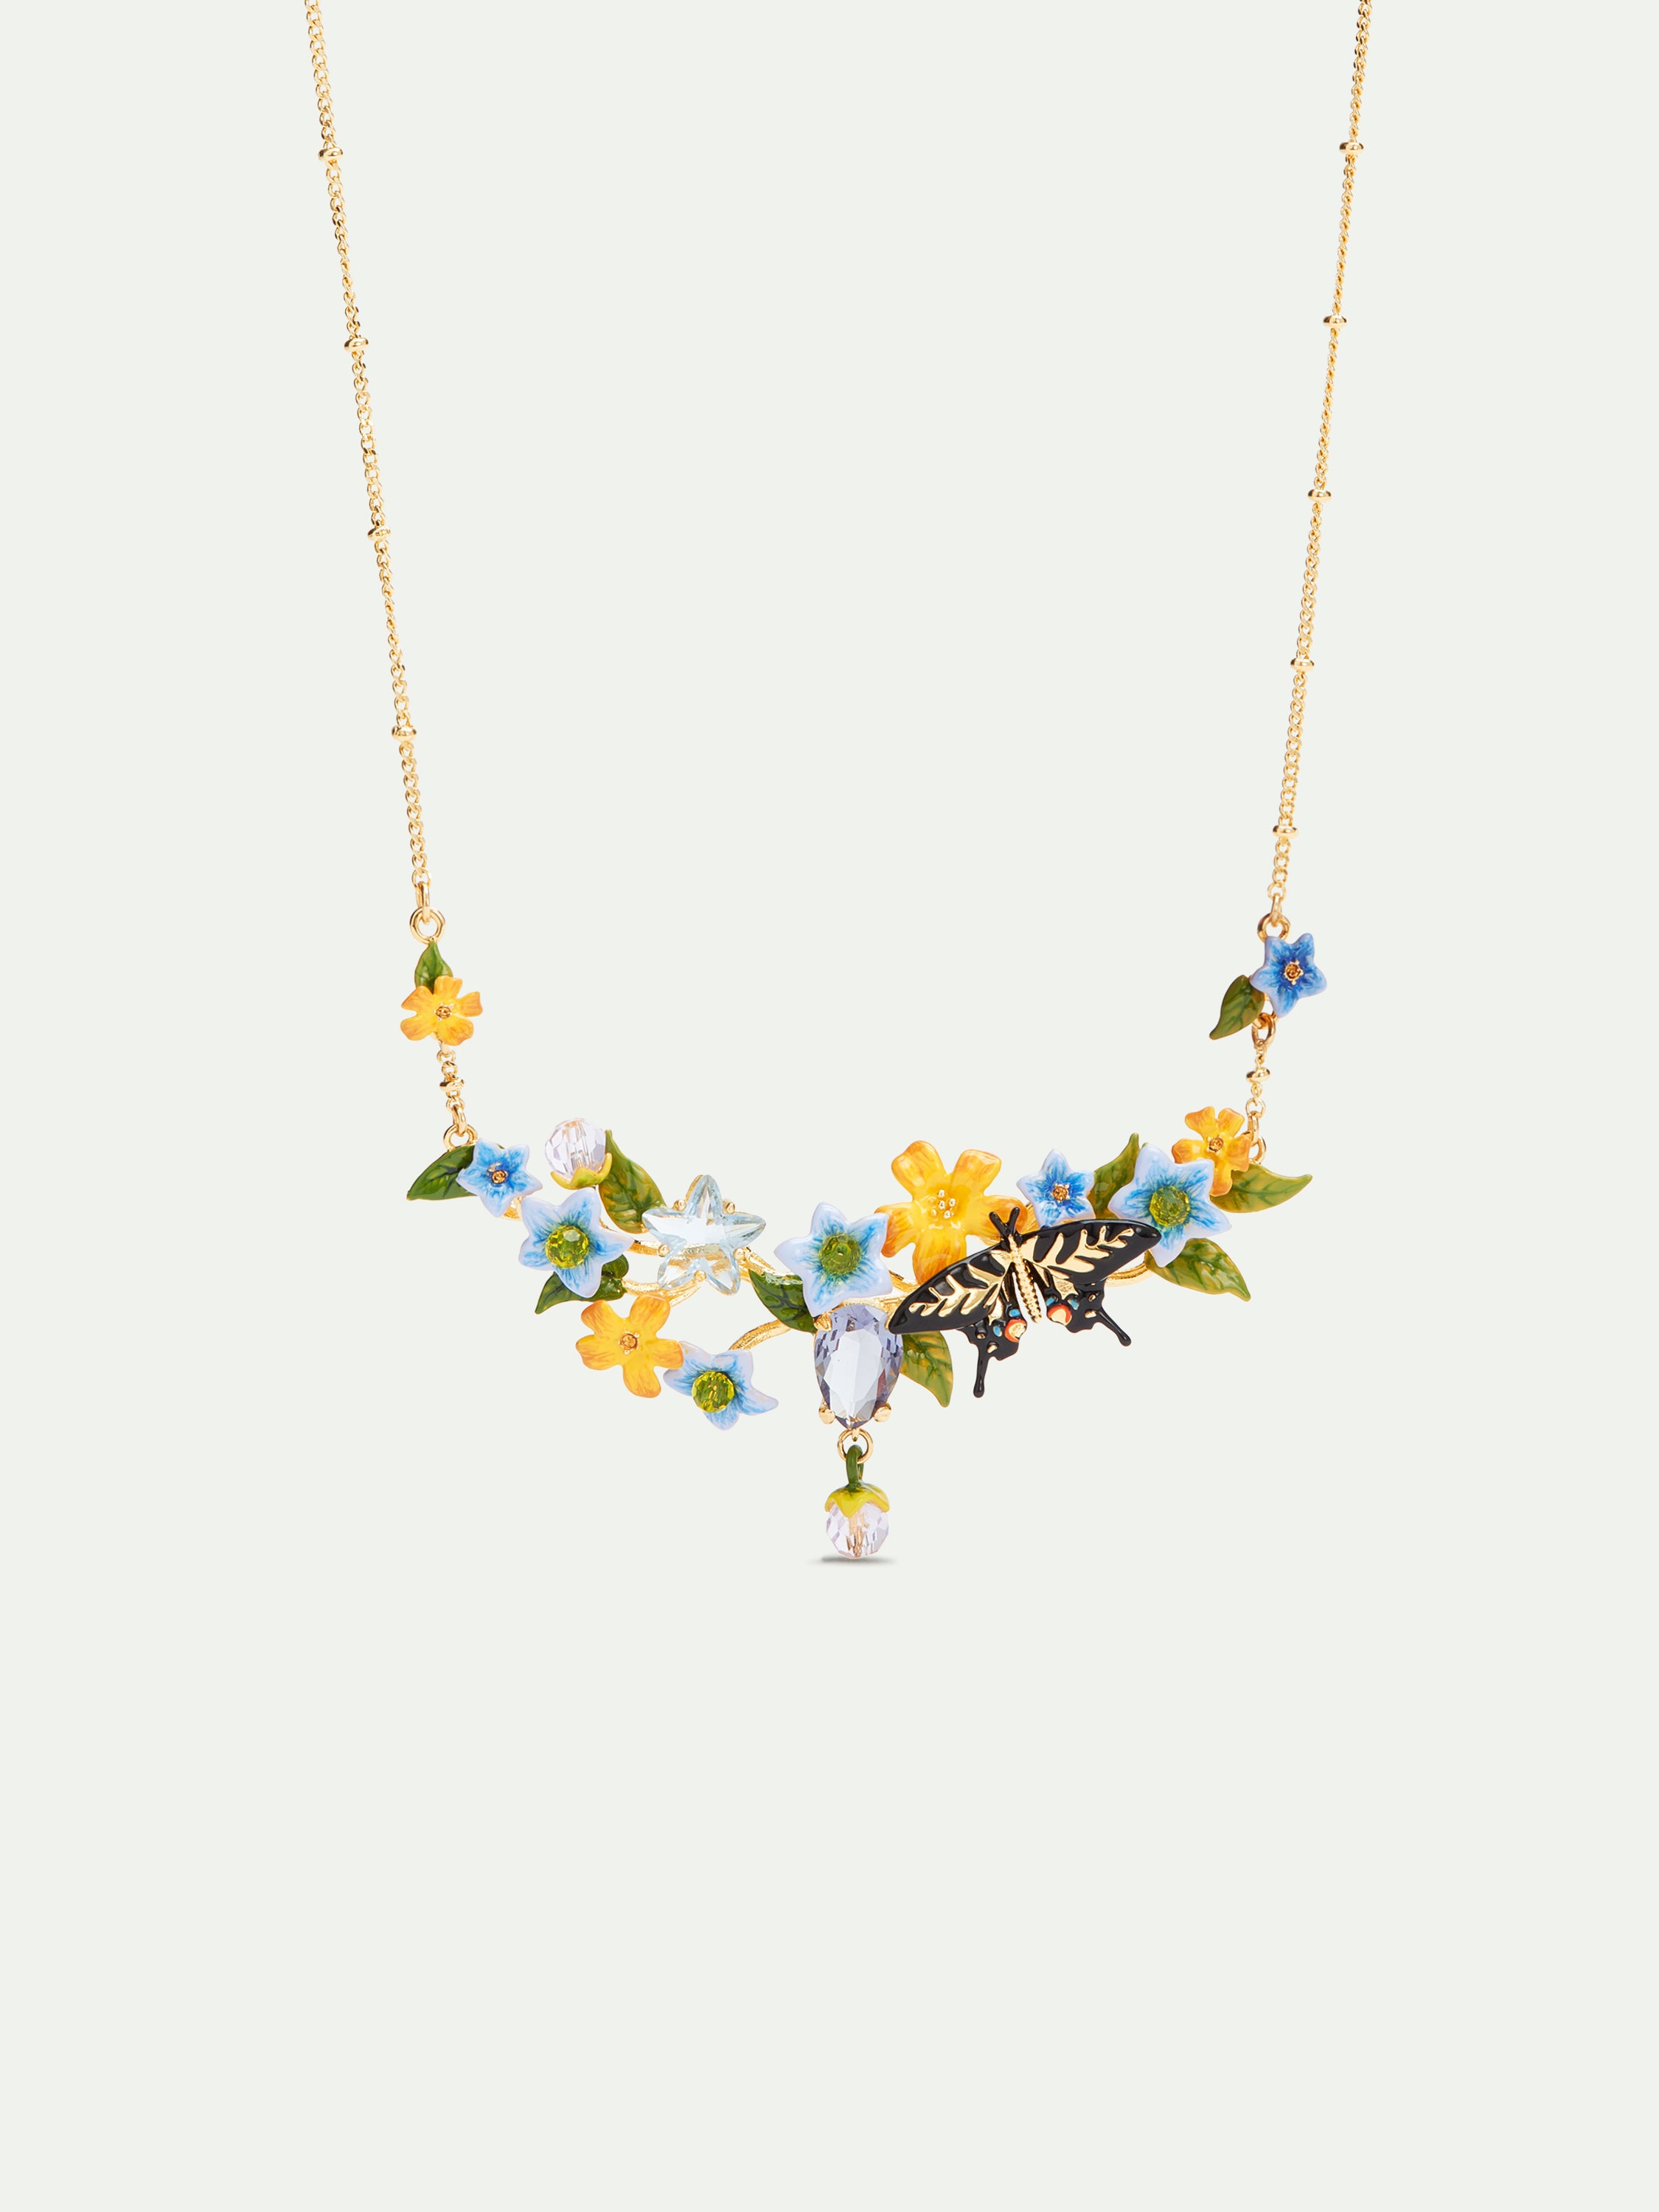 Butterfly, jasmine flowers and faceted glass Statement necklace